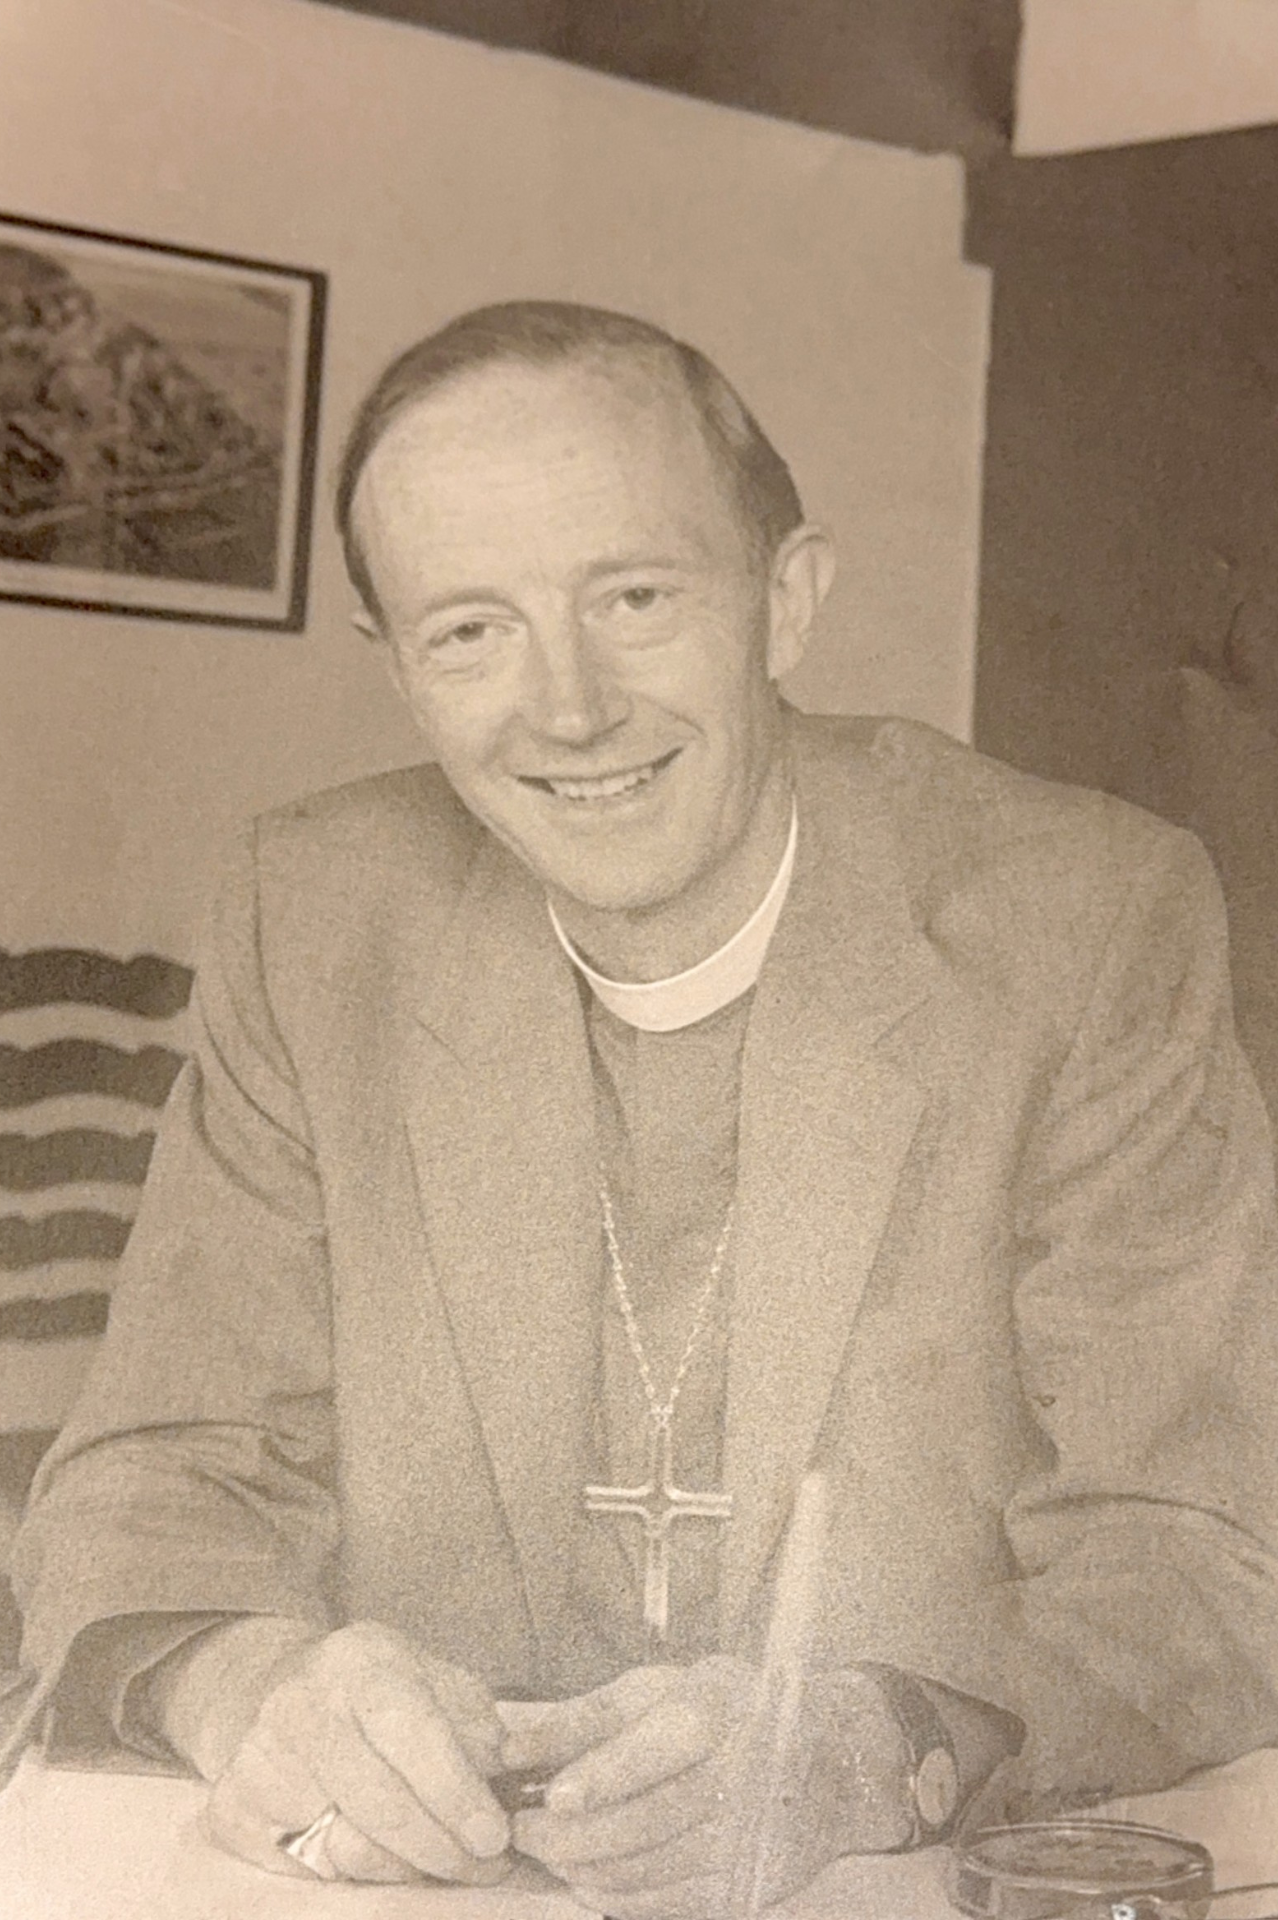 Photo of the late The Right Reverend Michael Adie, past Bishop of Guildford